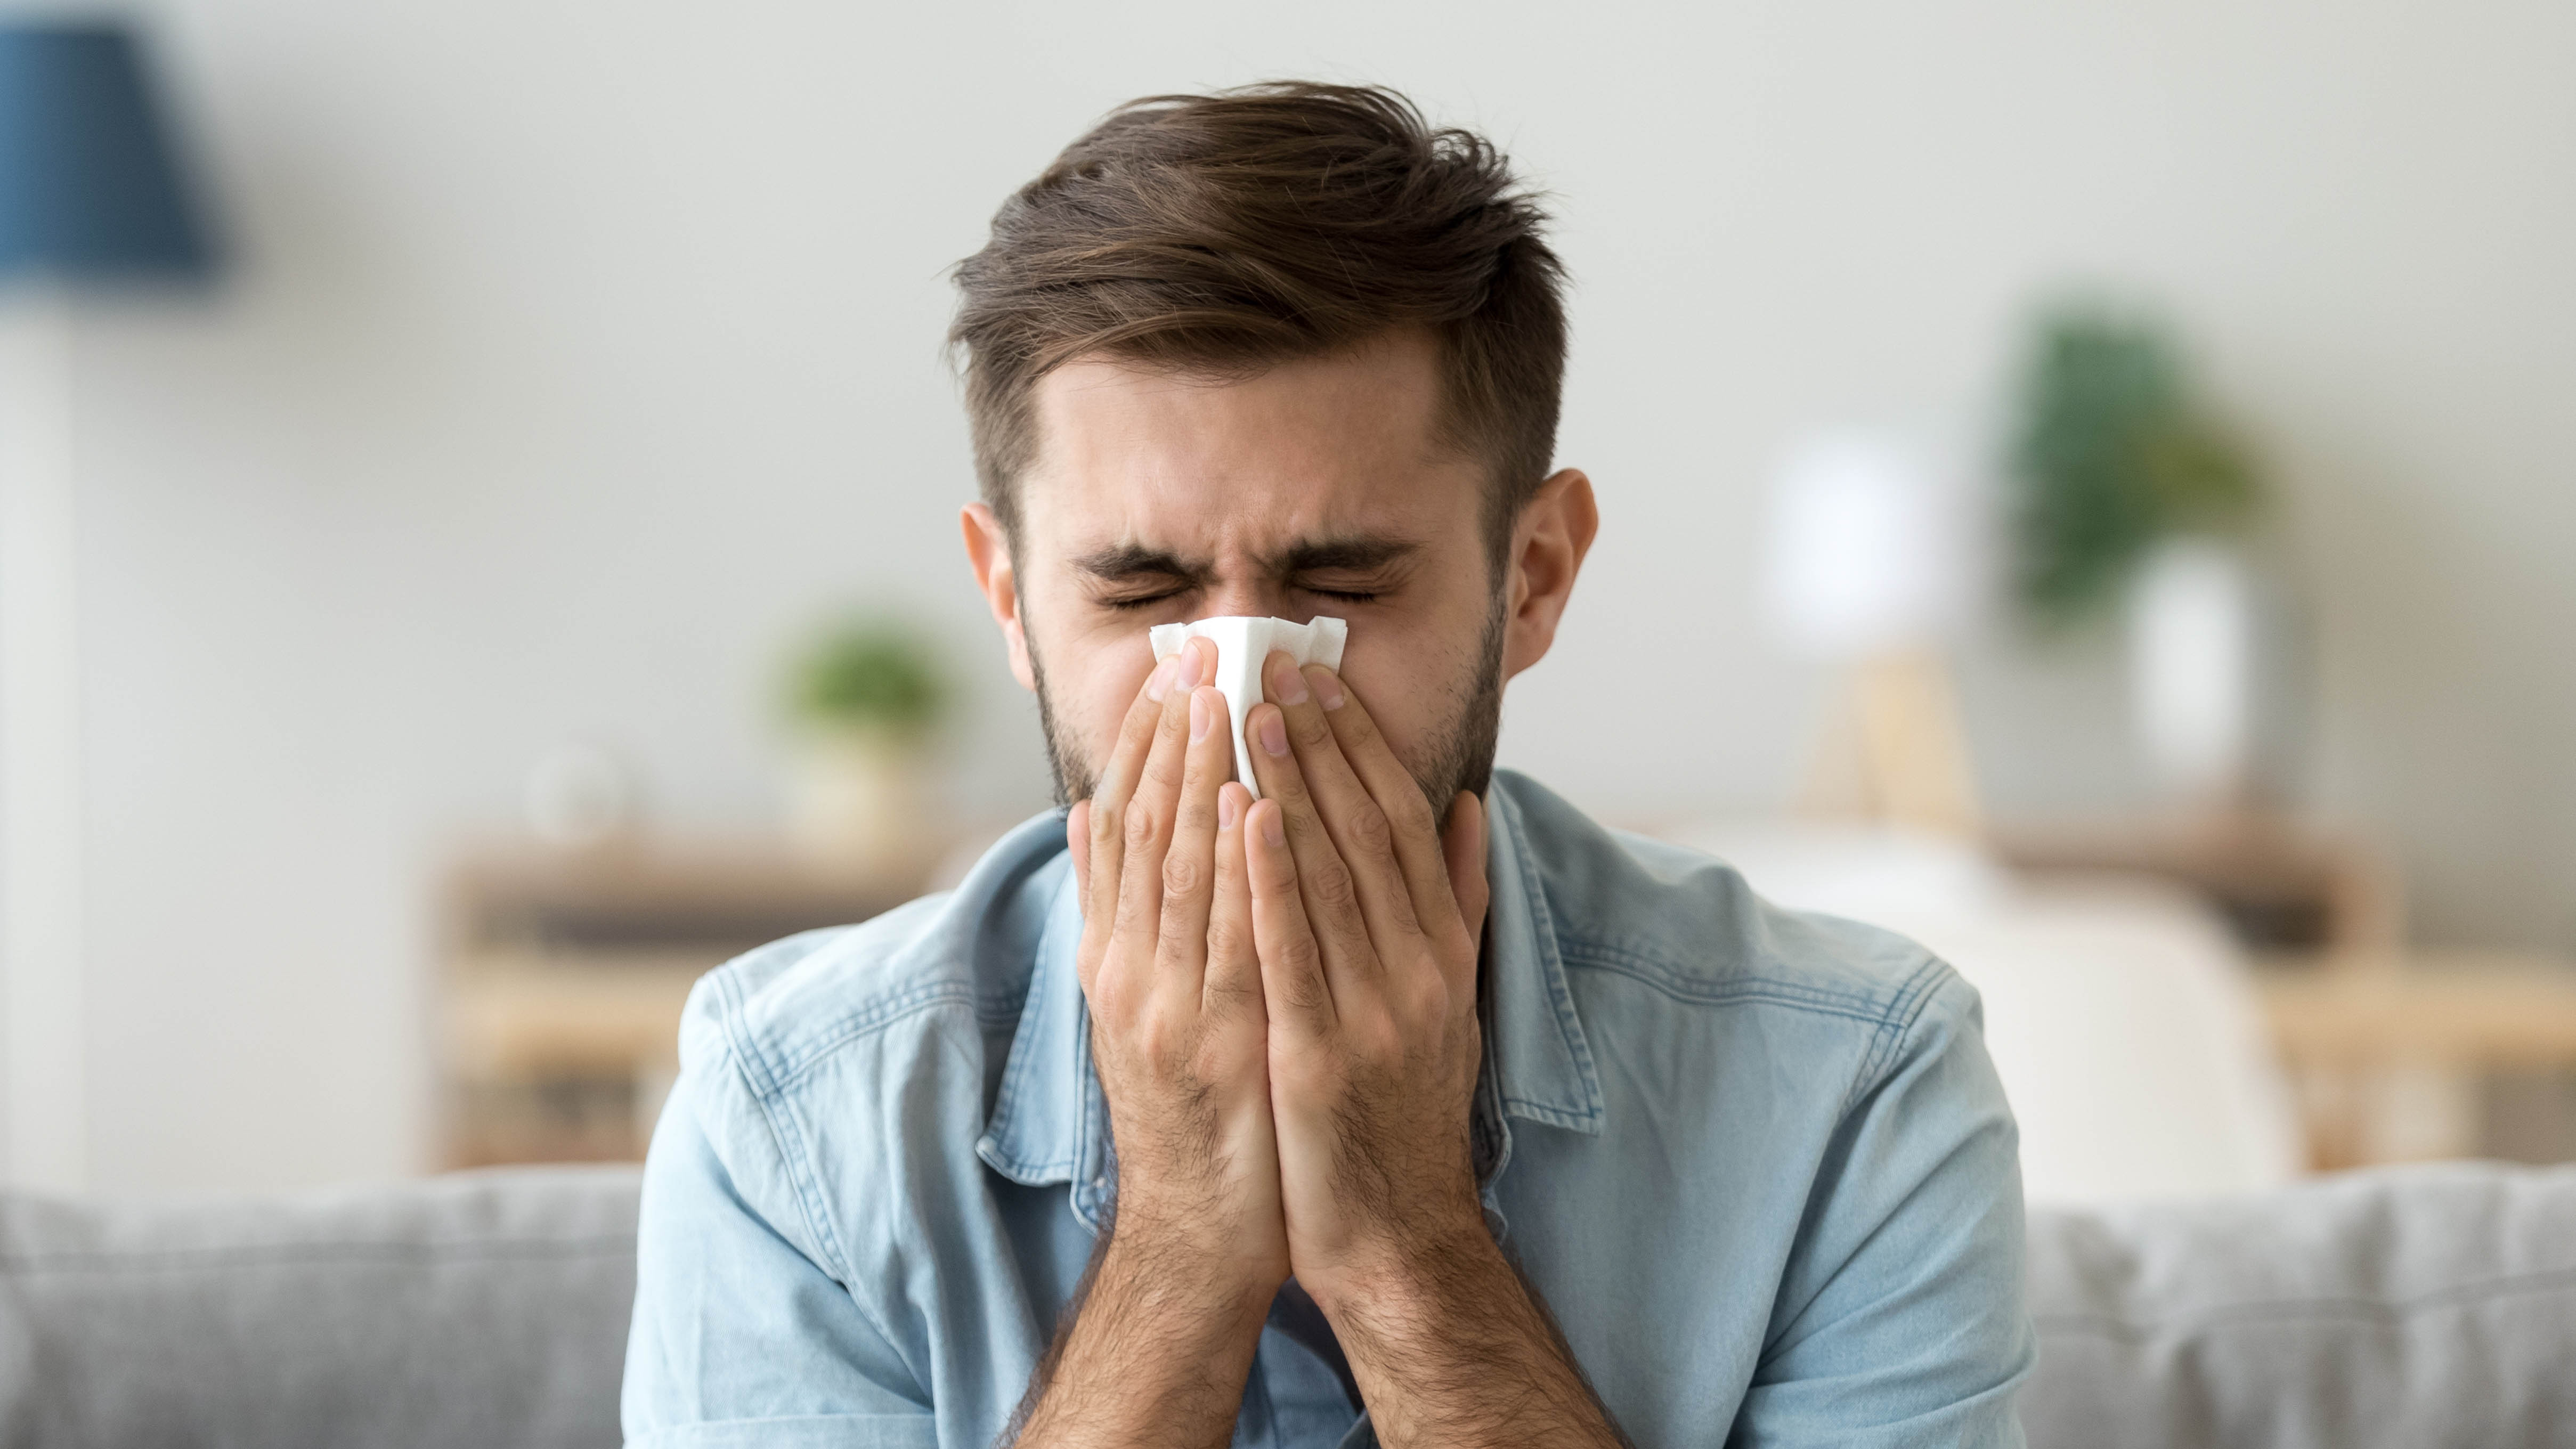 How to banish allergies from your home: Expert tips for a sneeze-free environment